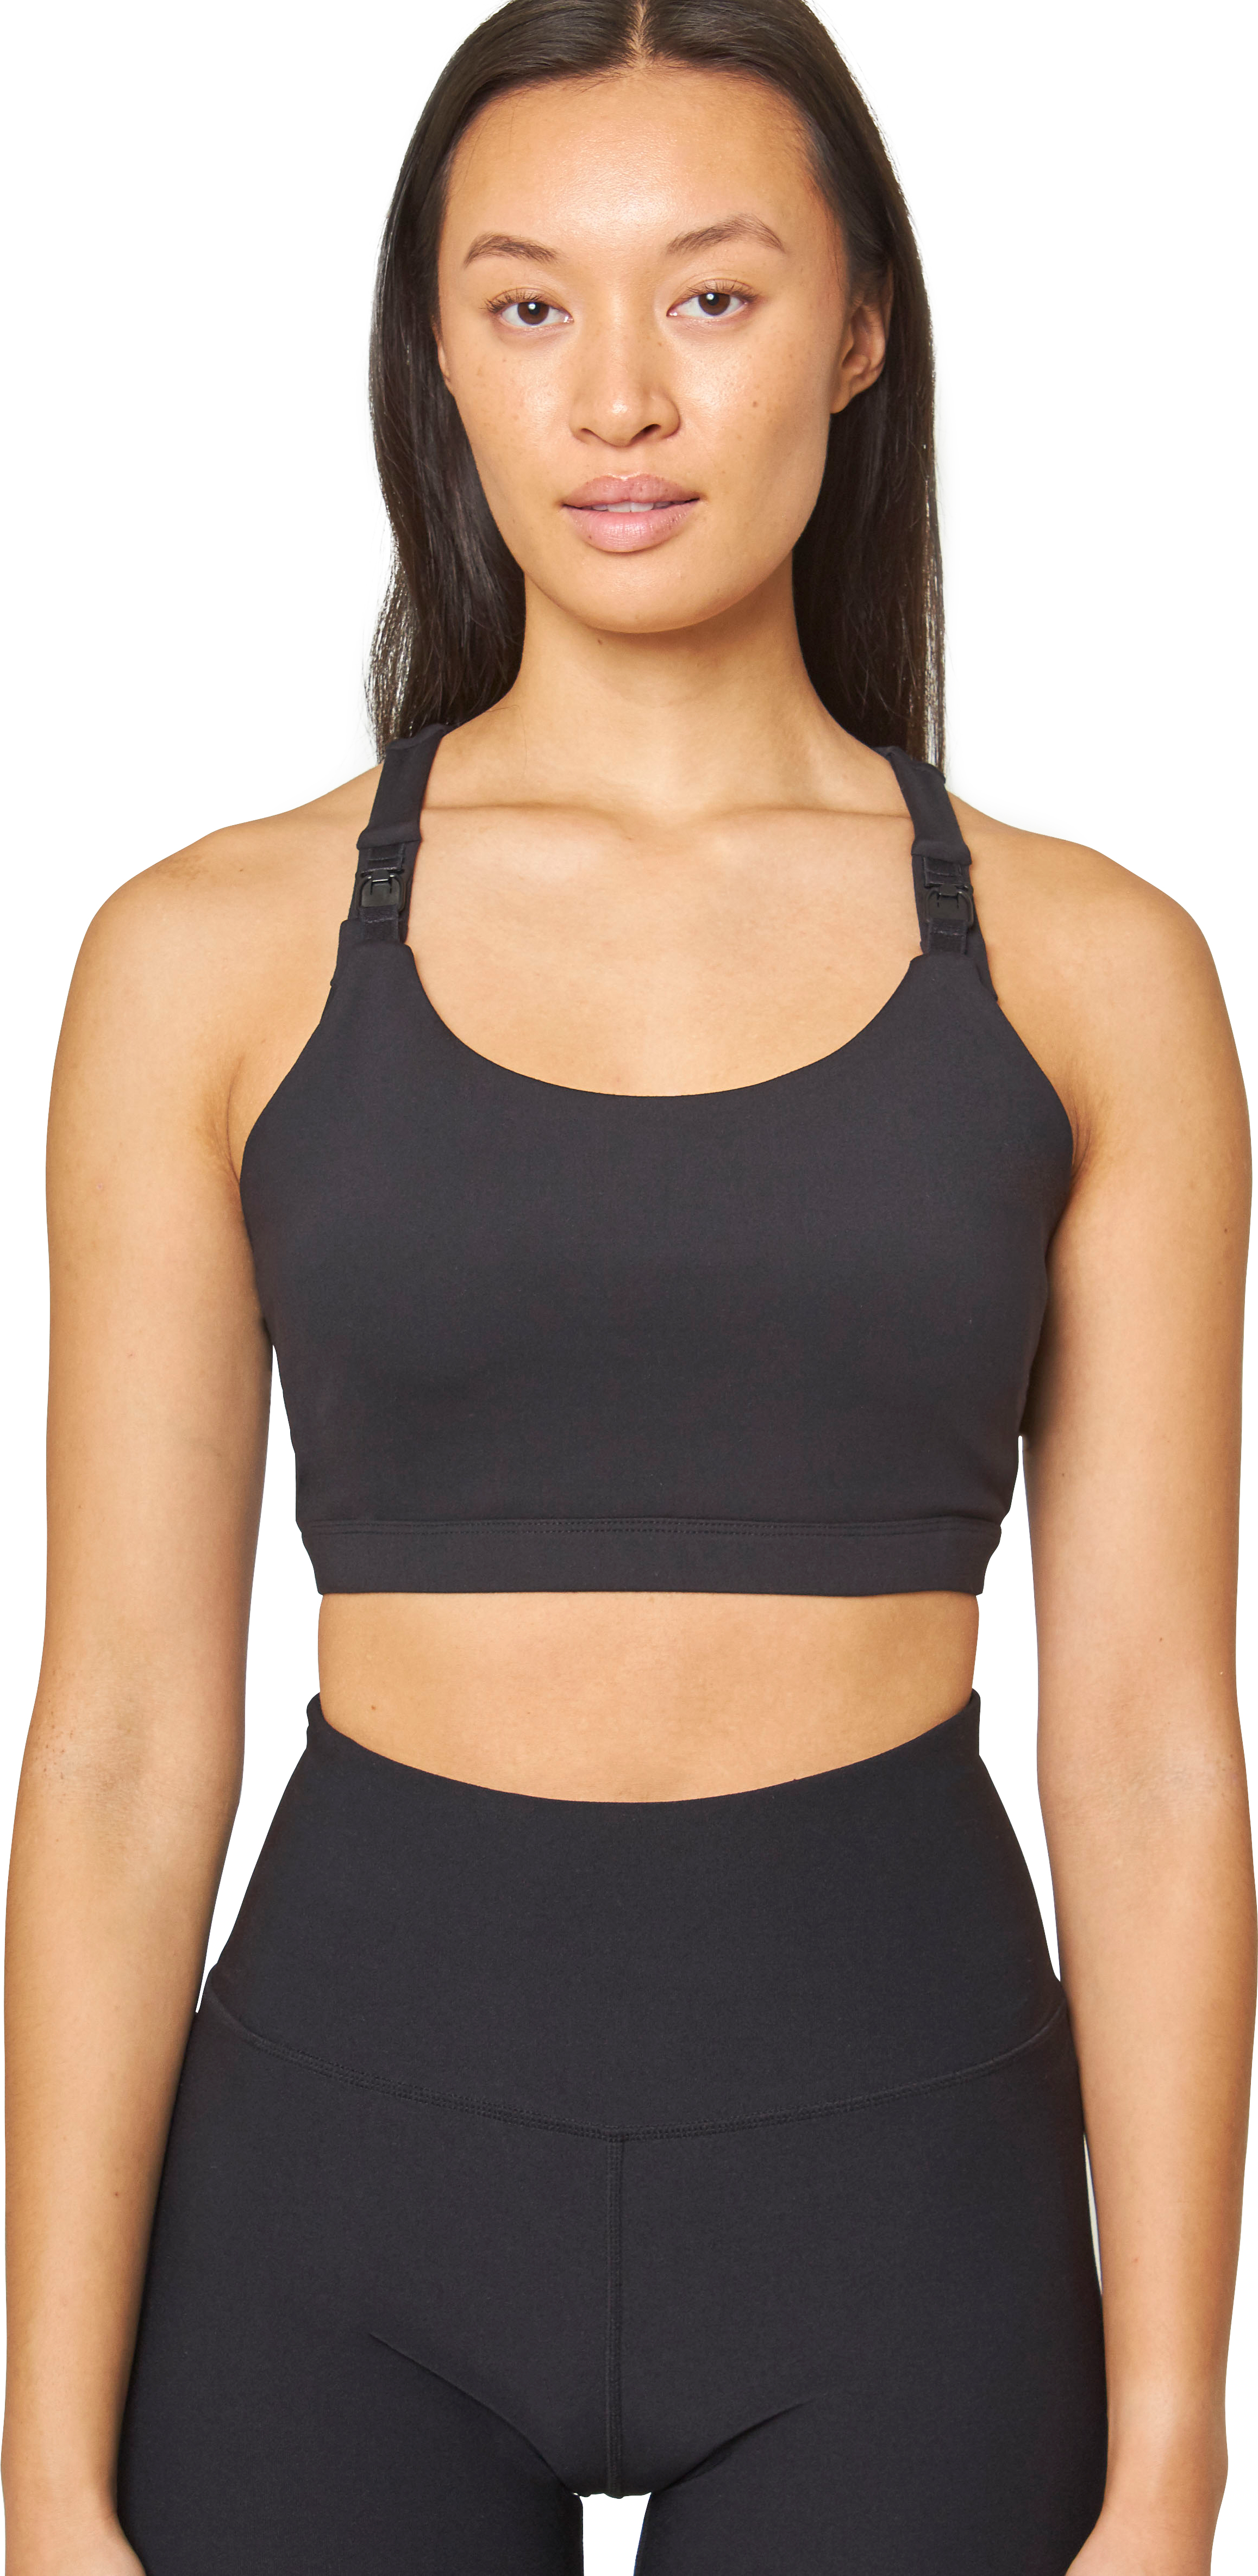 How to Choose a Maternity Sports Bra - Sports Bras Direct